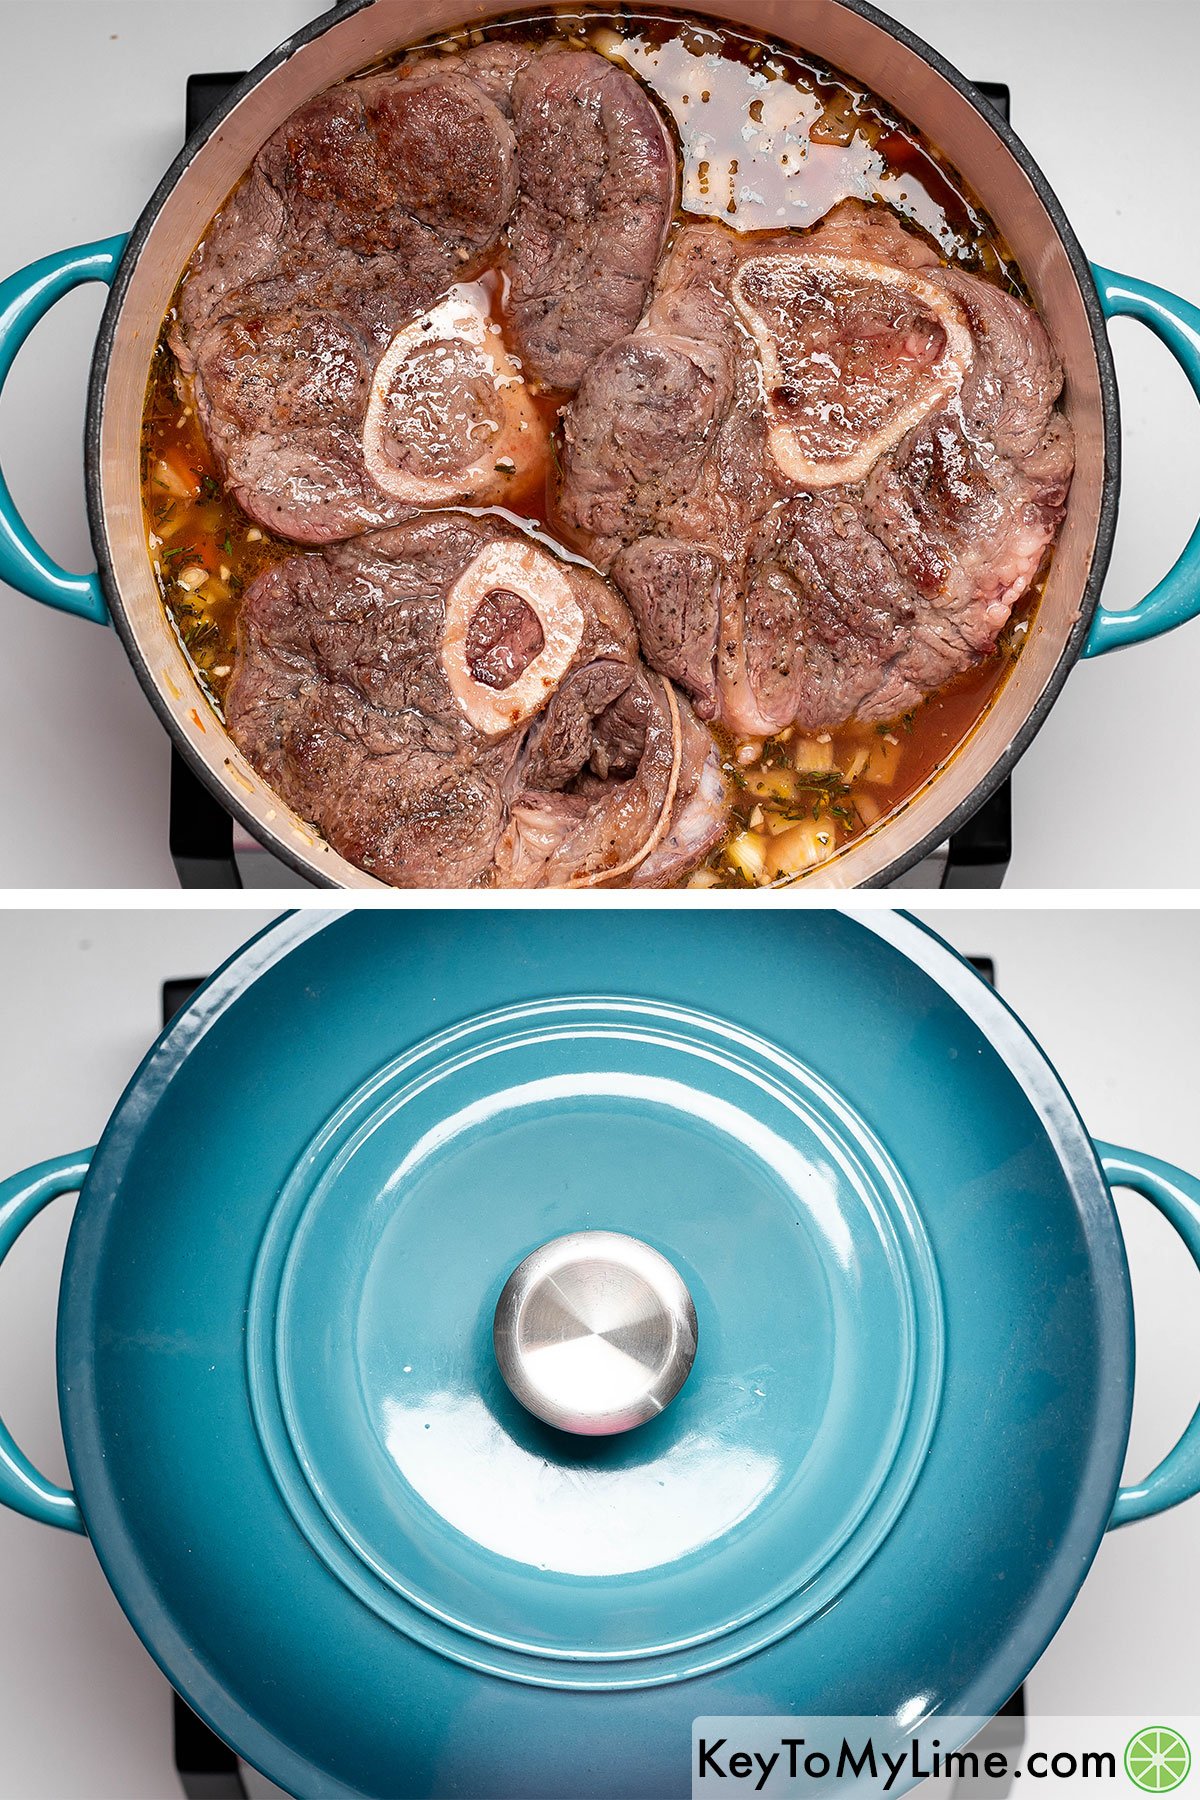 Covering the dutch oven with a lid, and then braising in an oven for a few hours until tender.